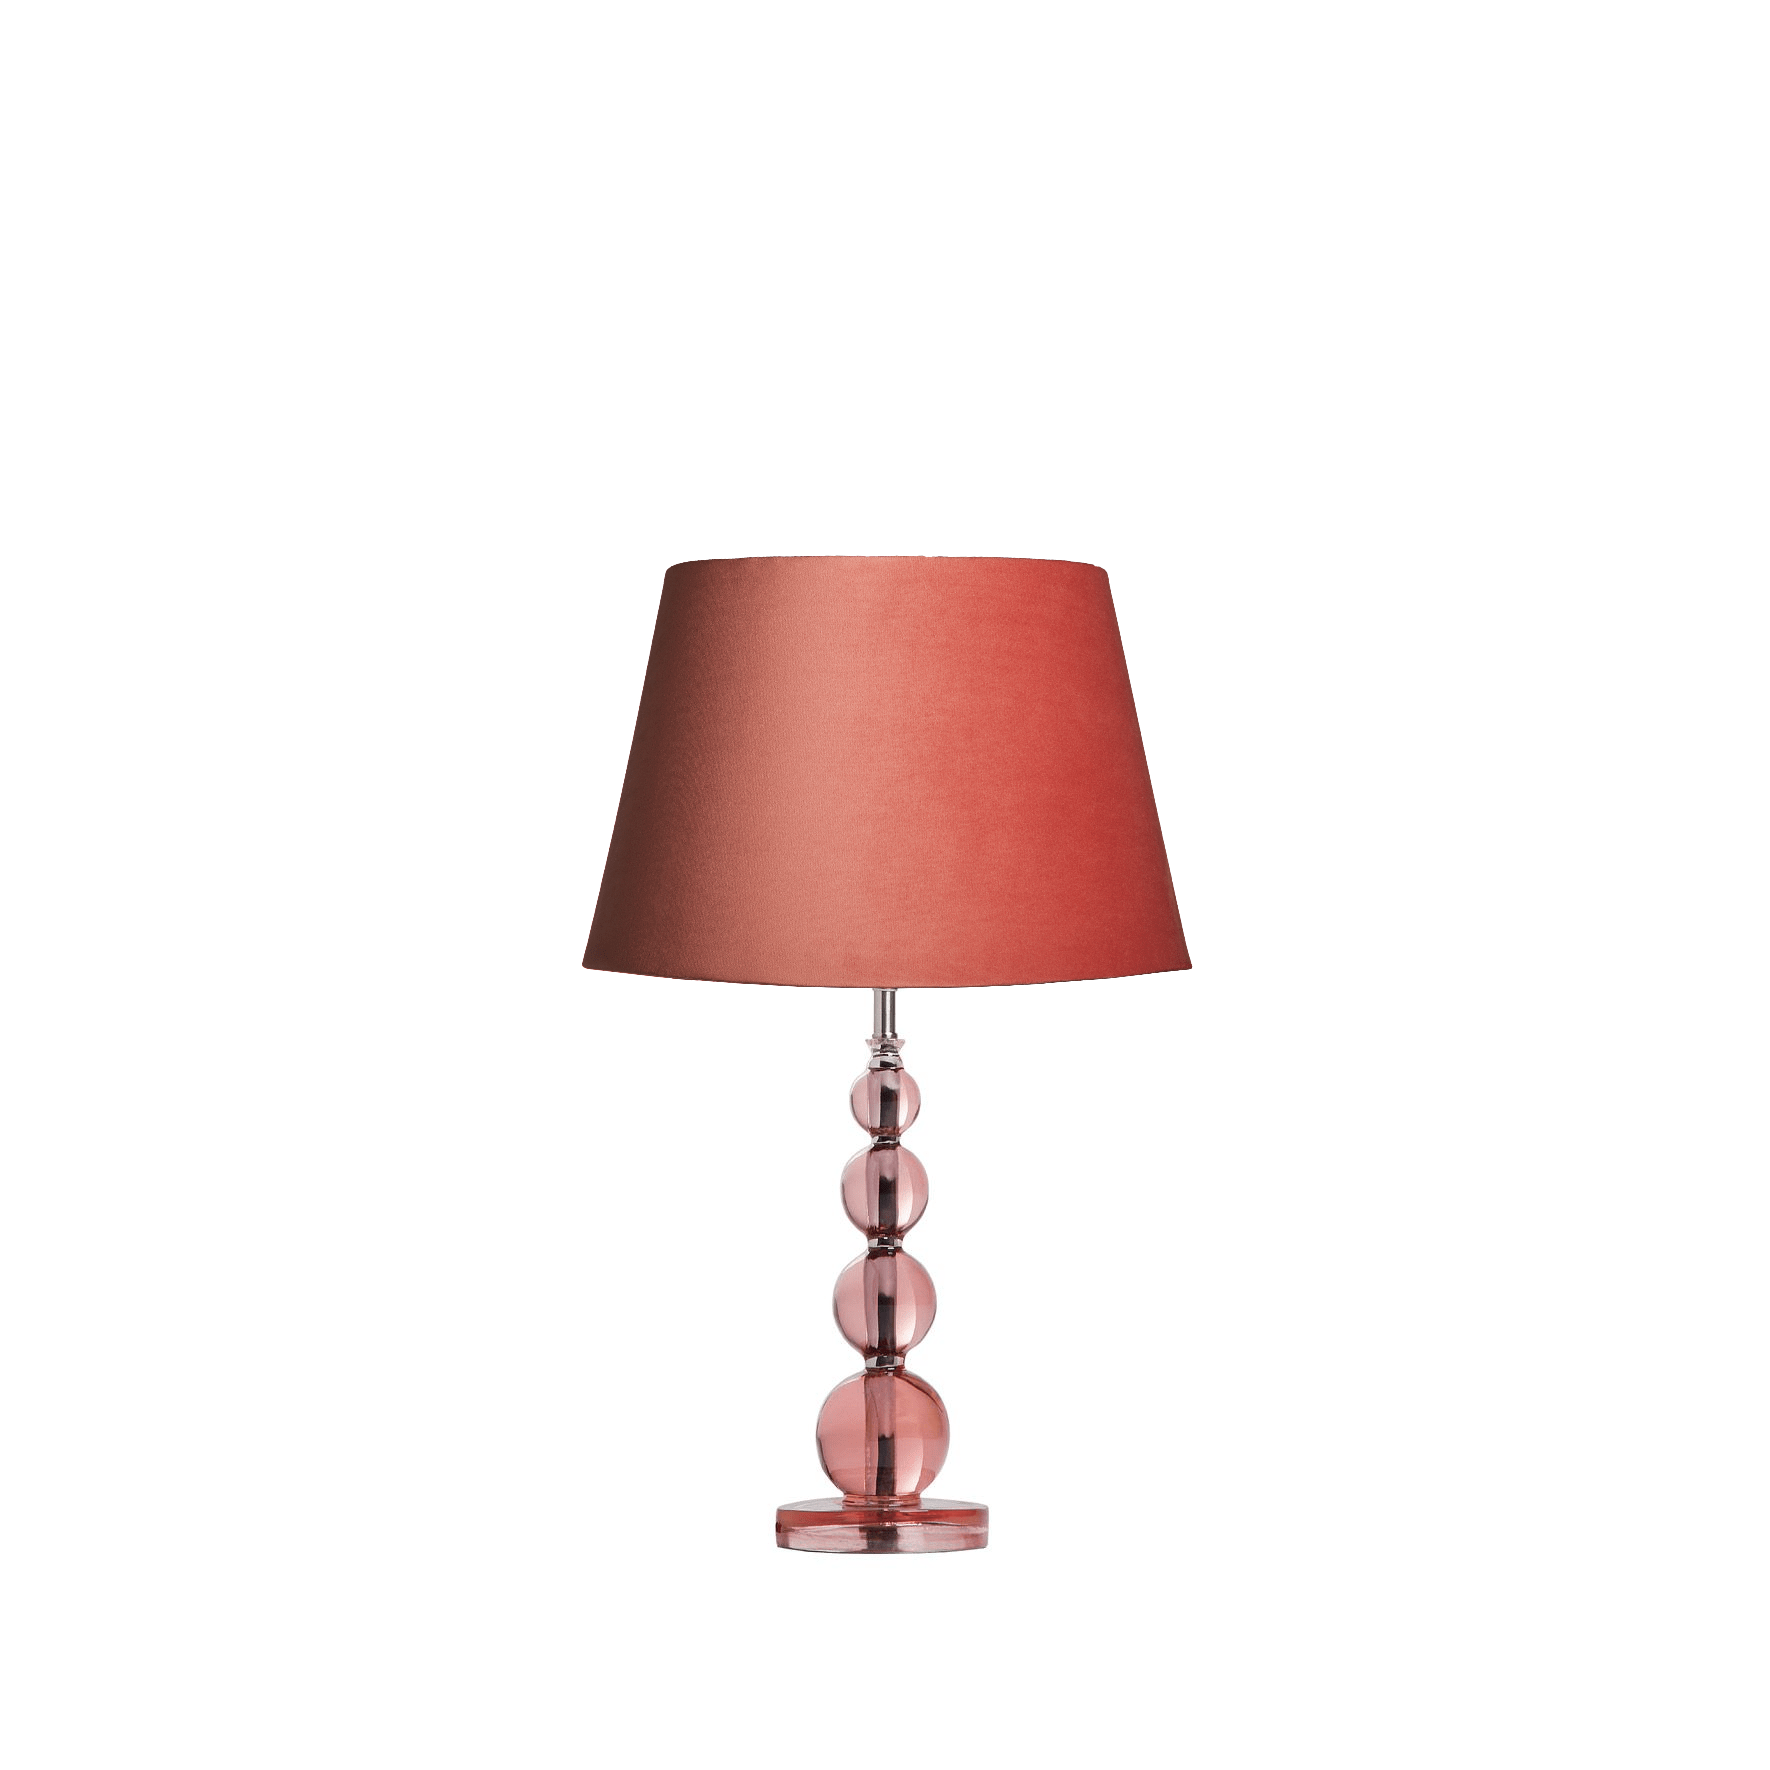 Aurora table lamp with pink velvet shade